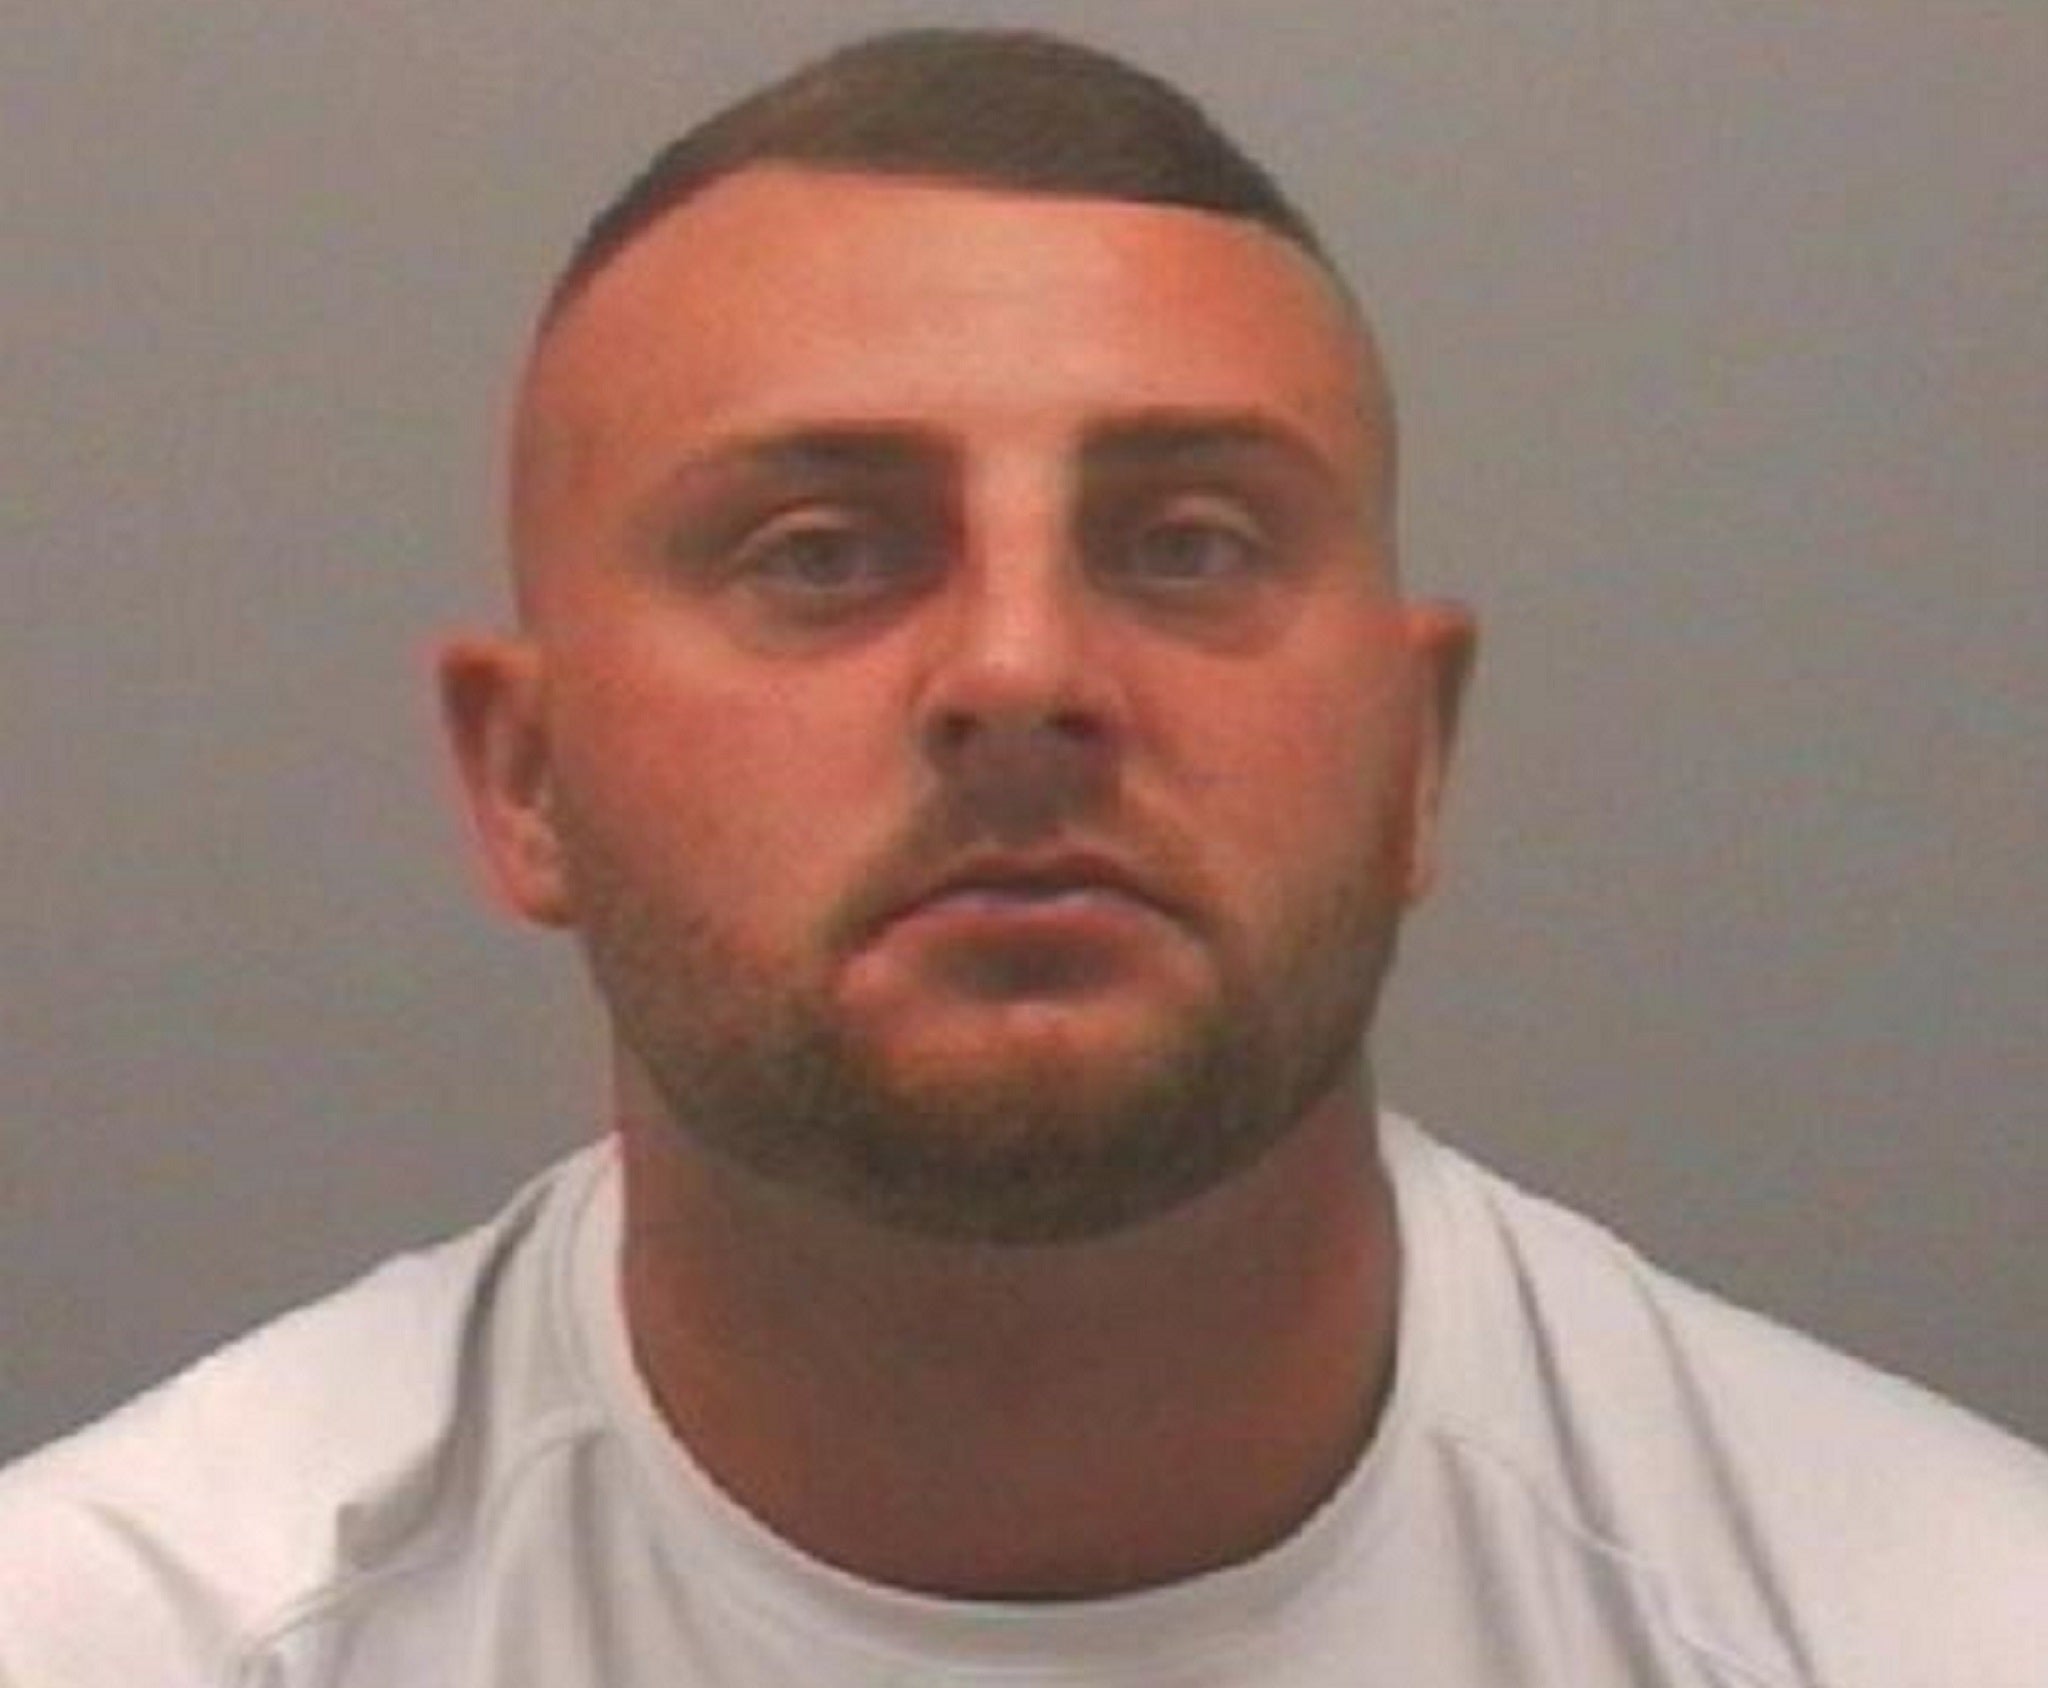 Daniel Walmsley, 29, was jailed on 1 May 2020 for deliberately driving his car into a man following an argument at Newcastle's Bigg Market in July 2019.